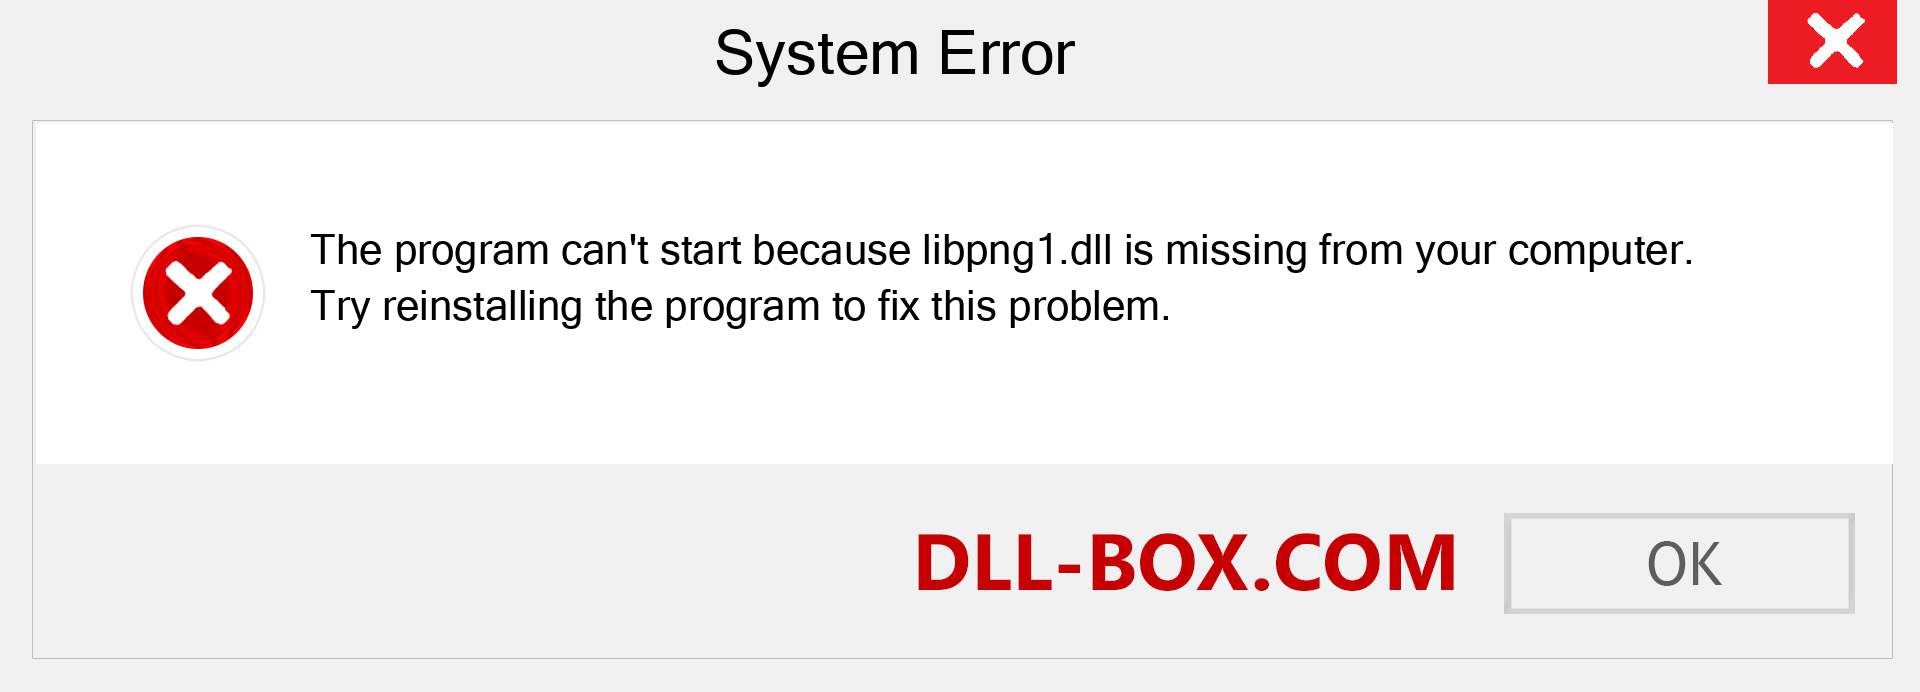  libpng1.dll file is missing?. Download for Windows 7, 8, 10 - Fix  libpng1 dll Missing Error on Windows, photos, images